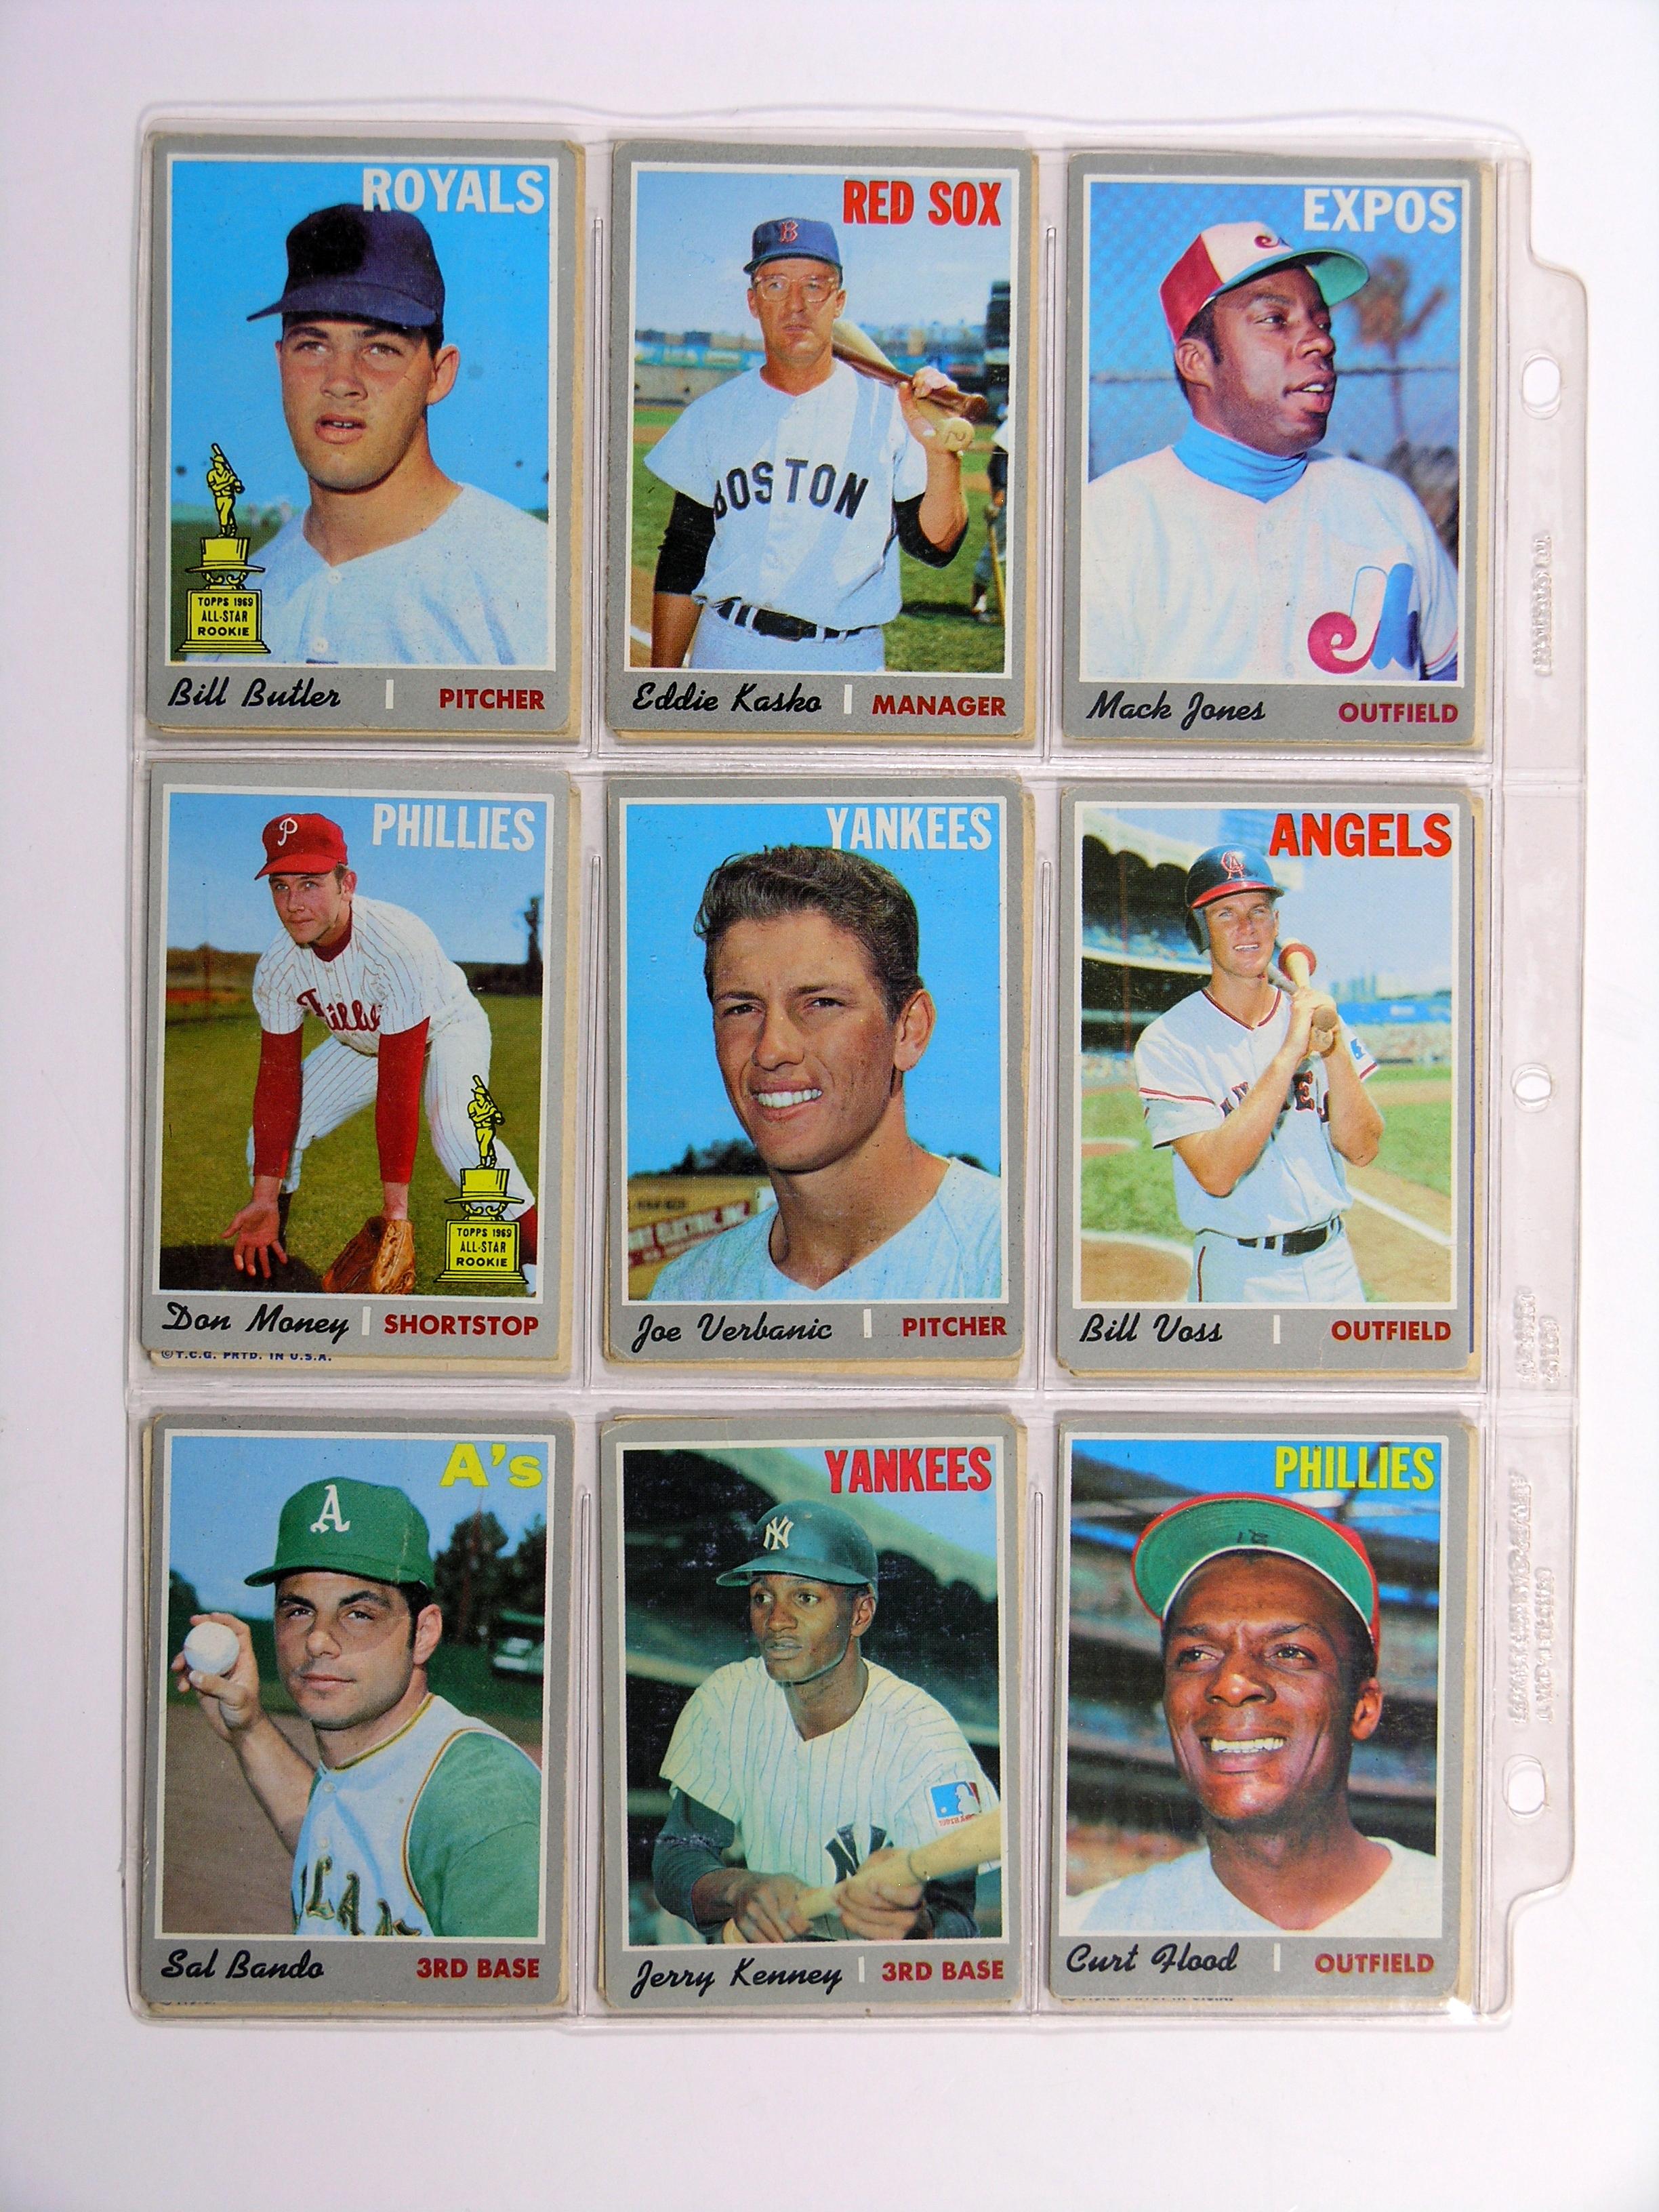 (71) 1970 Topps Baseball Cards VG/EX Conditions